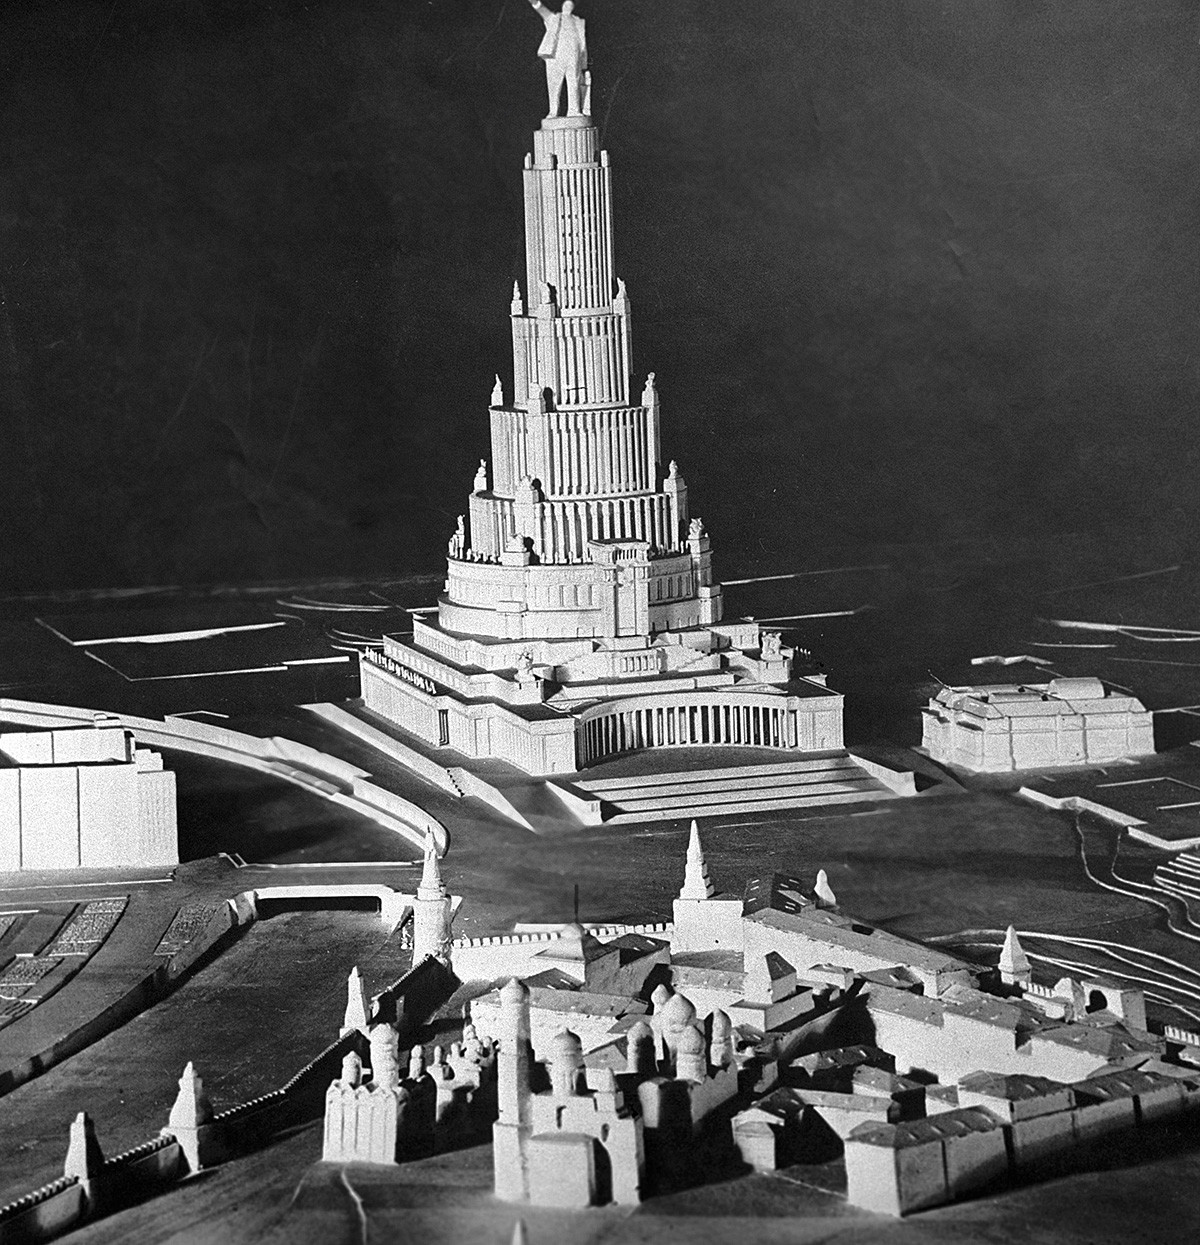 A model of the Palace from Moscow Museum archive